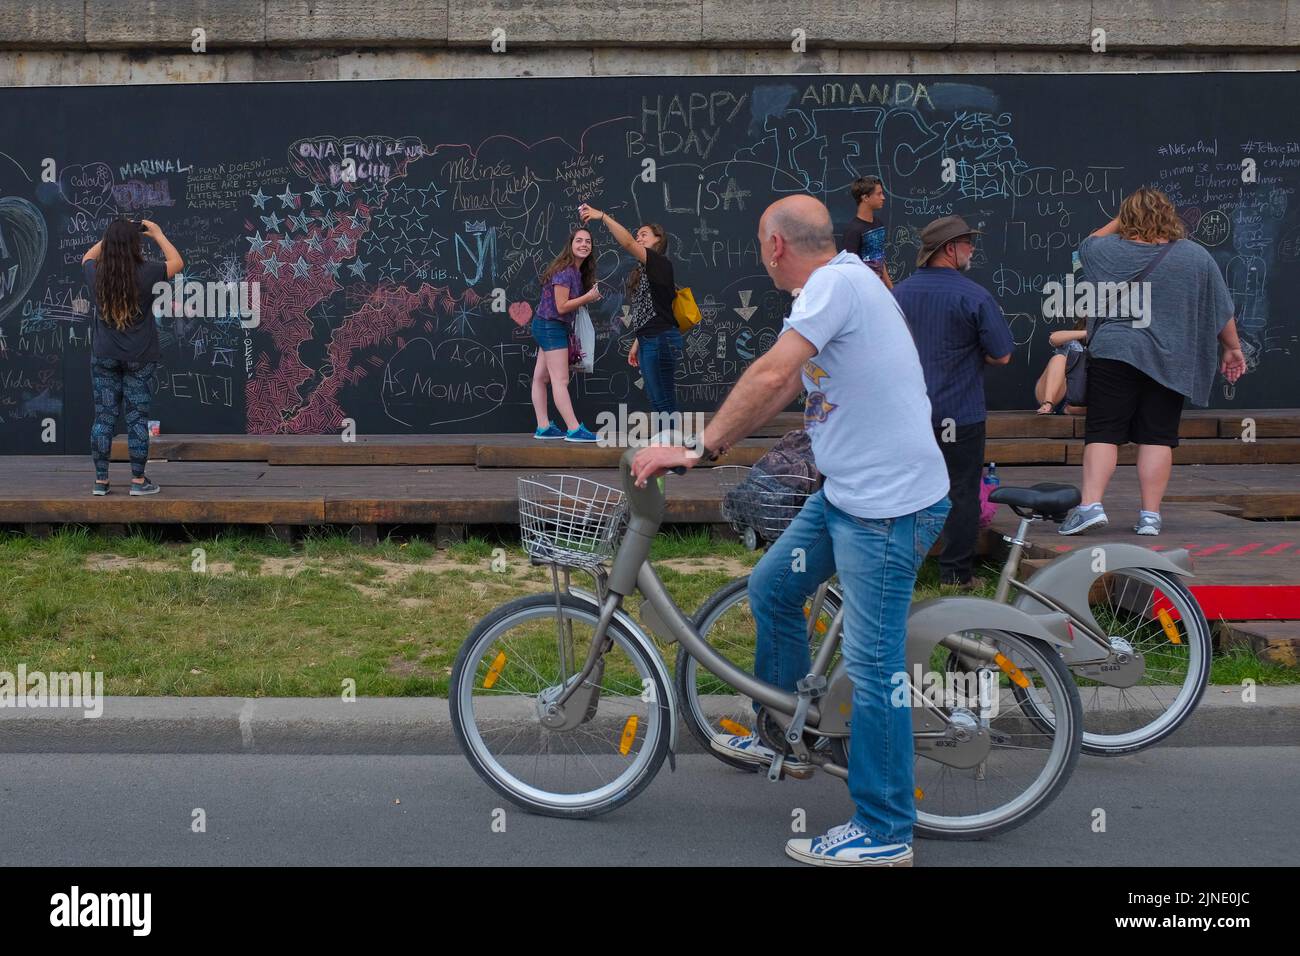 Man on a bicycle stops to join other people by the interactive chalkboard by the Seine river. Beautiful summer day outdoor in Paris, France. Stock Photo